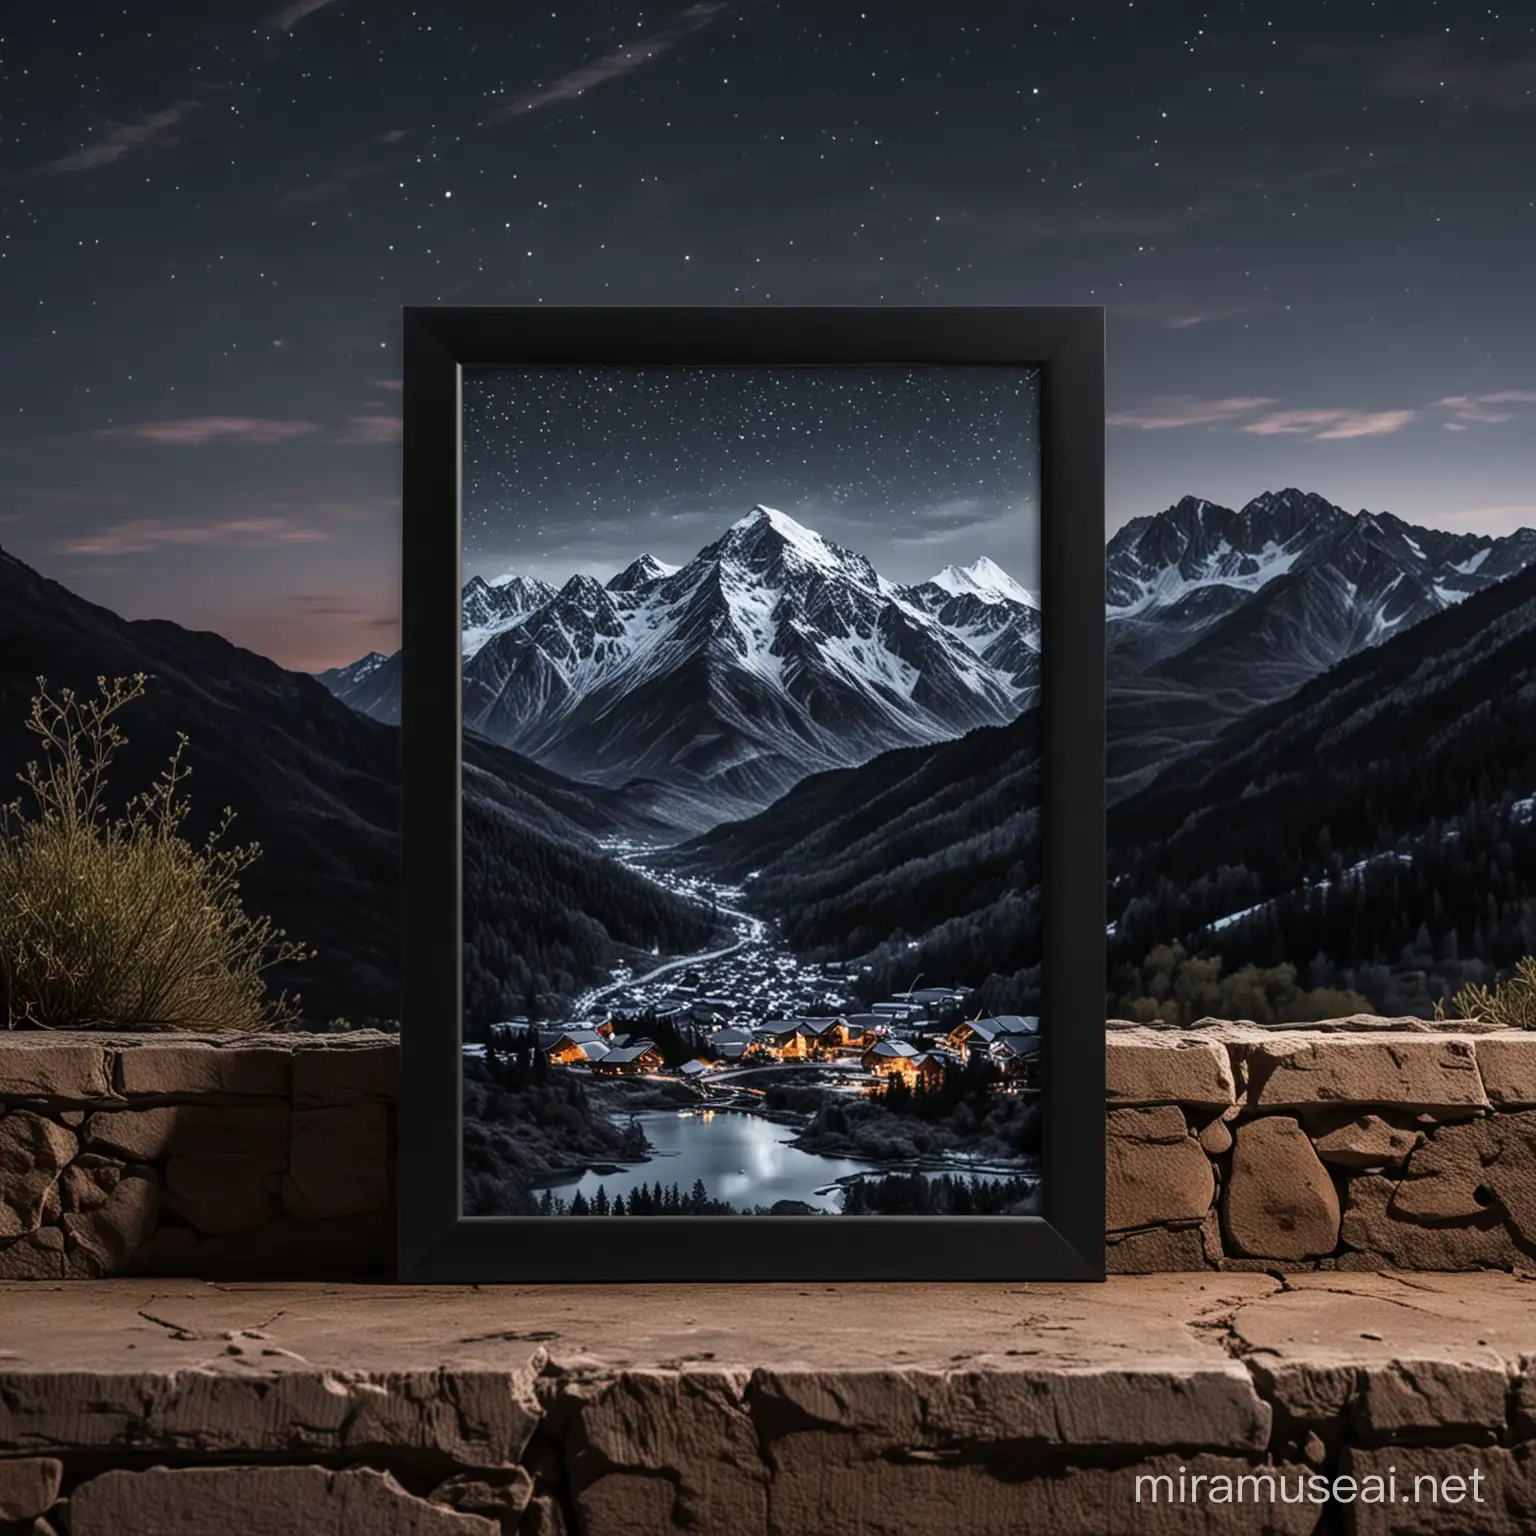 small A4 black frame mockup in the outside with a mountain view during the night
